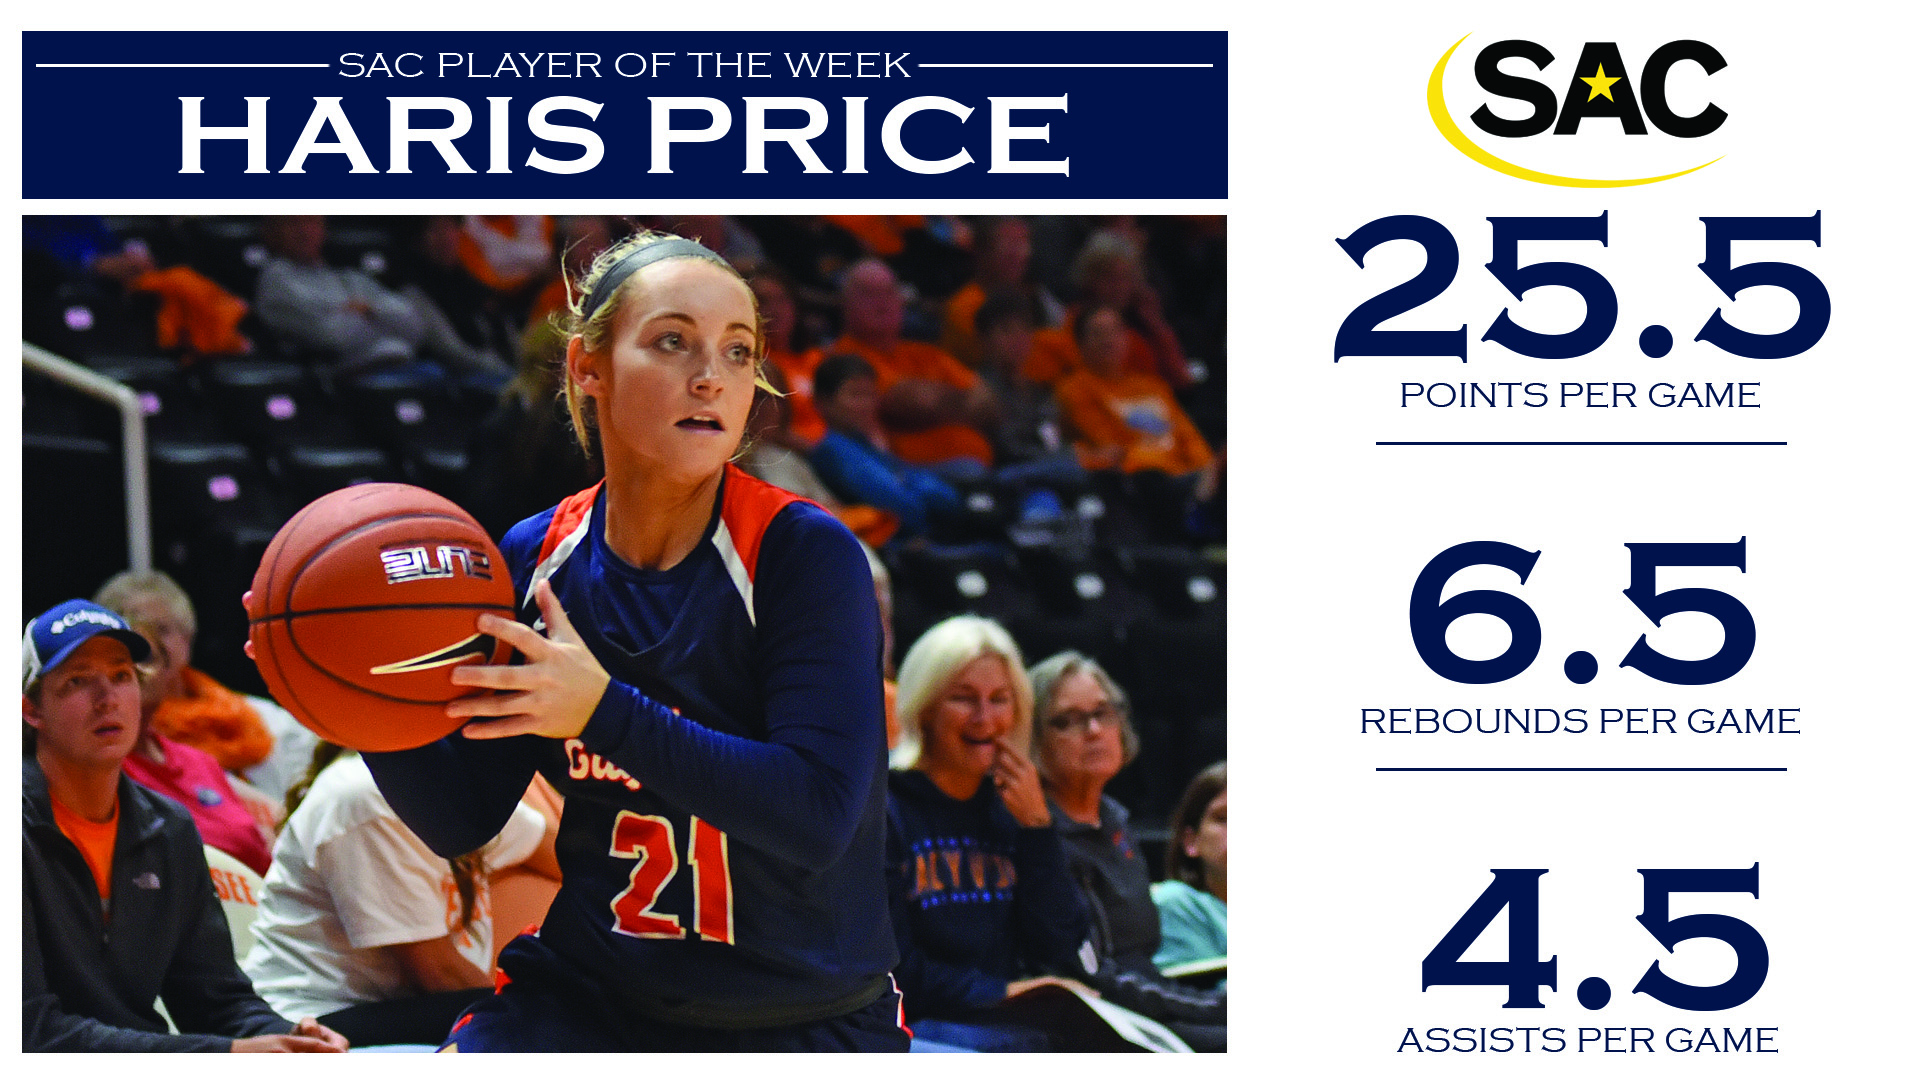 Price goes back-to-back as SAC Player of the Week